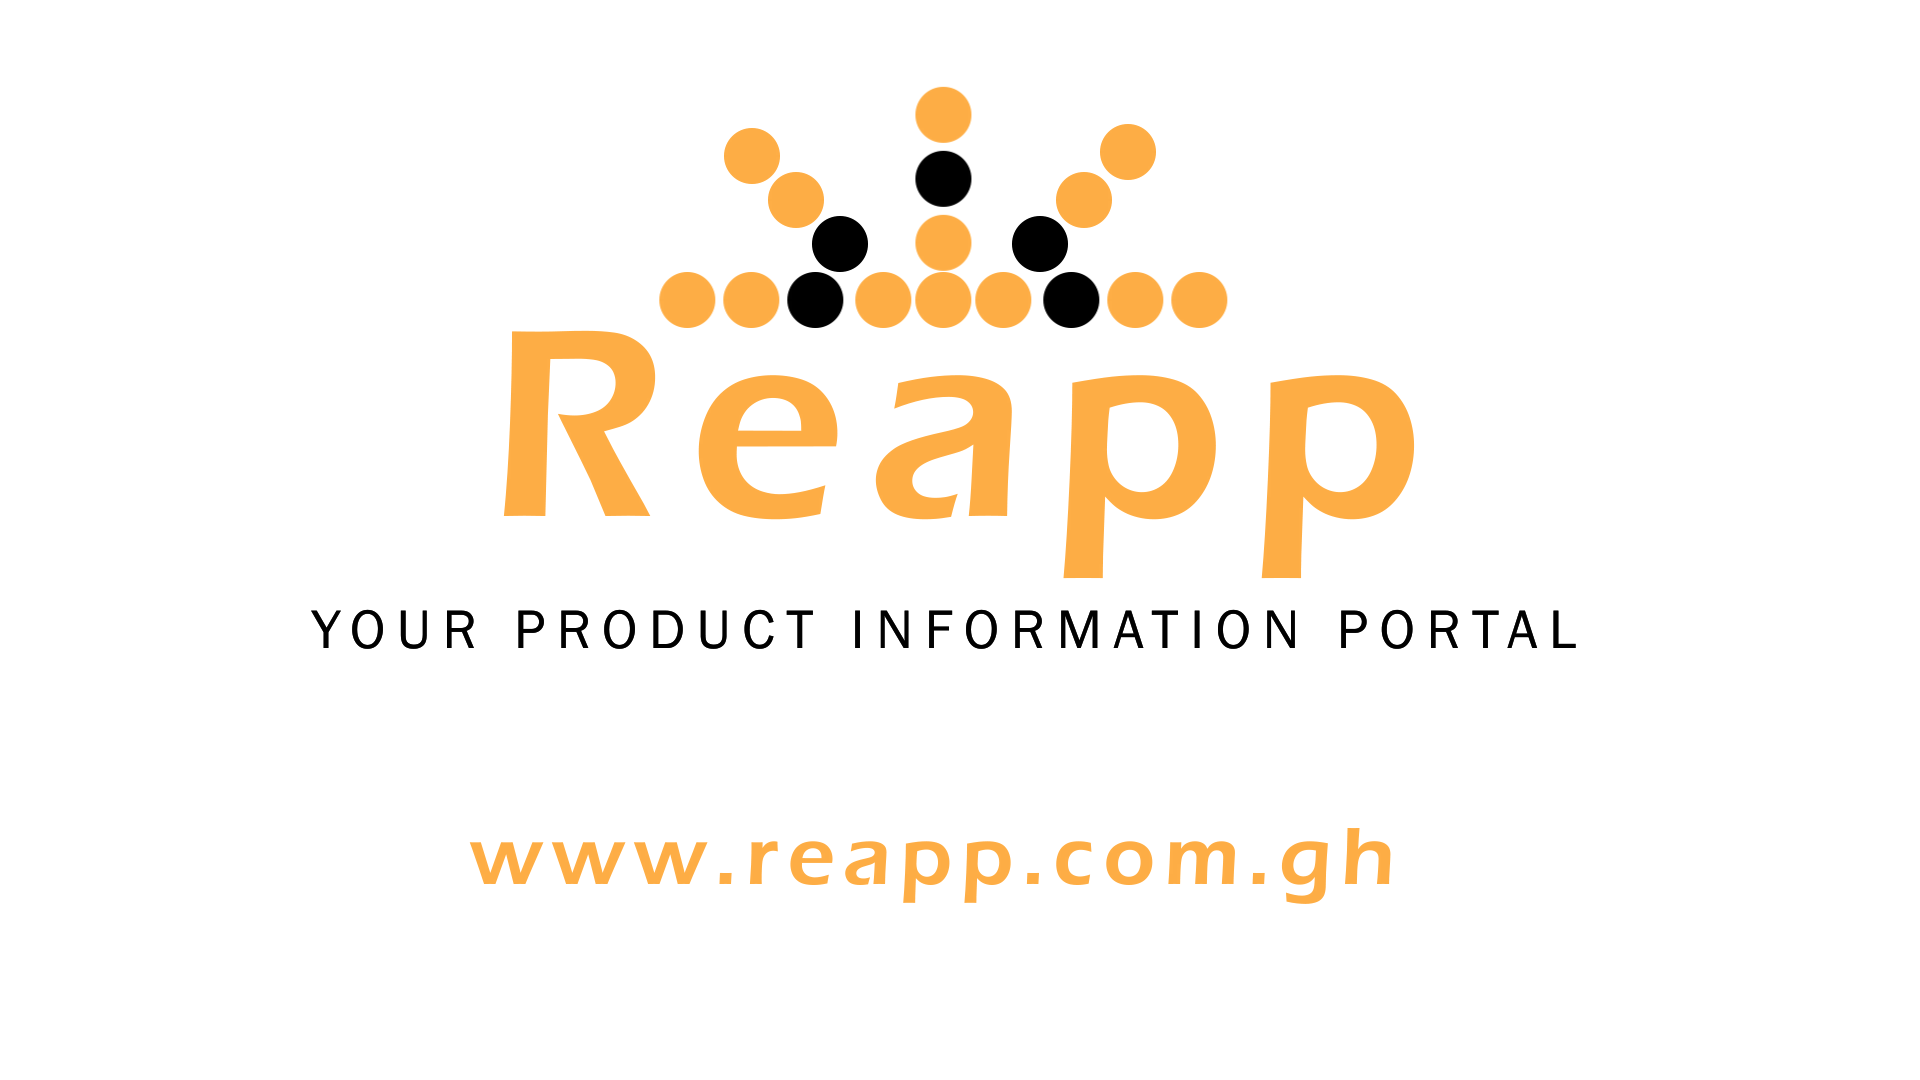 Reapp, your product information portal